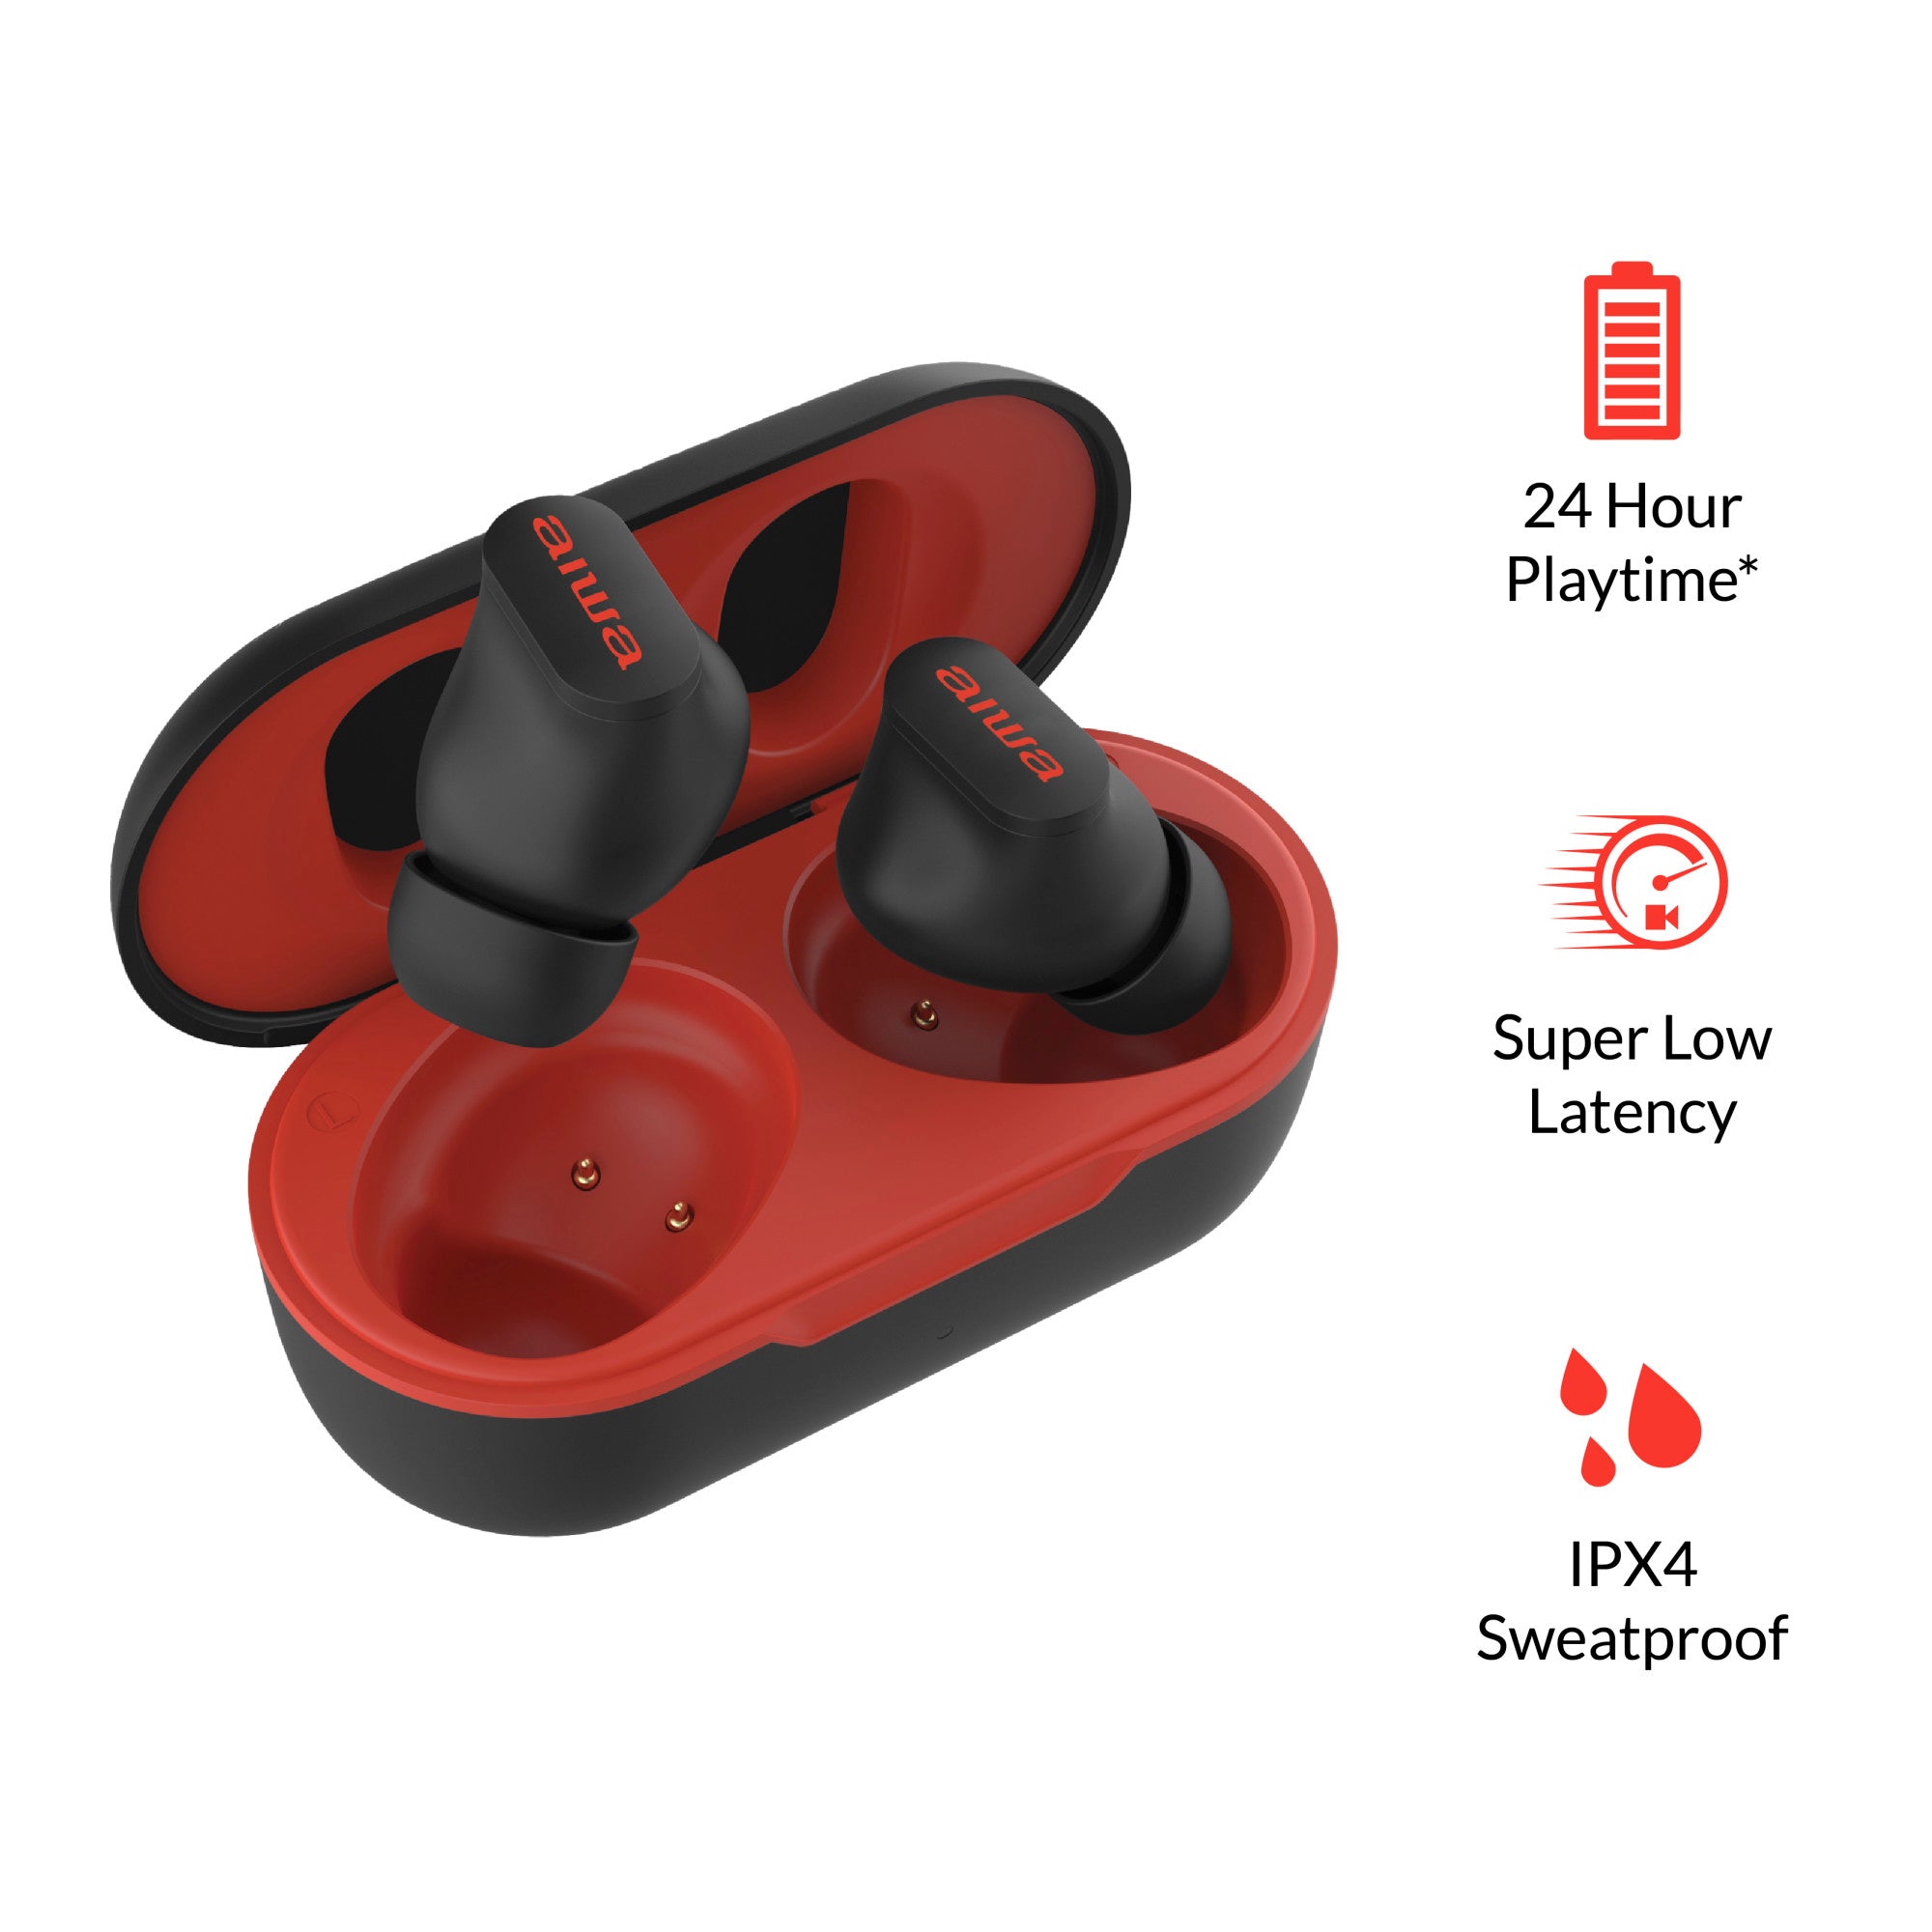 Connect Pro Wireless Earbuds True Wireless Stereo Headphones with Wireless Charging Case, IPX4 Waterproof